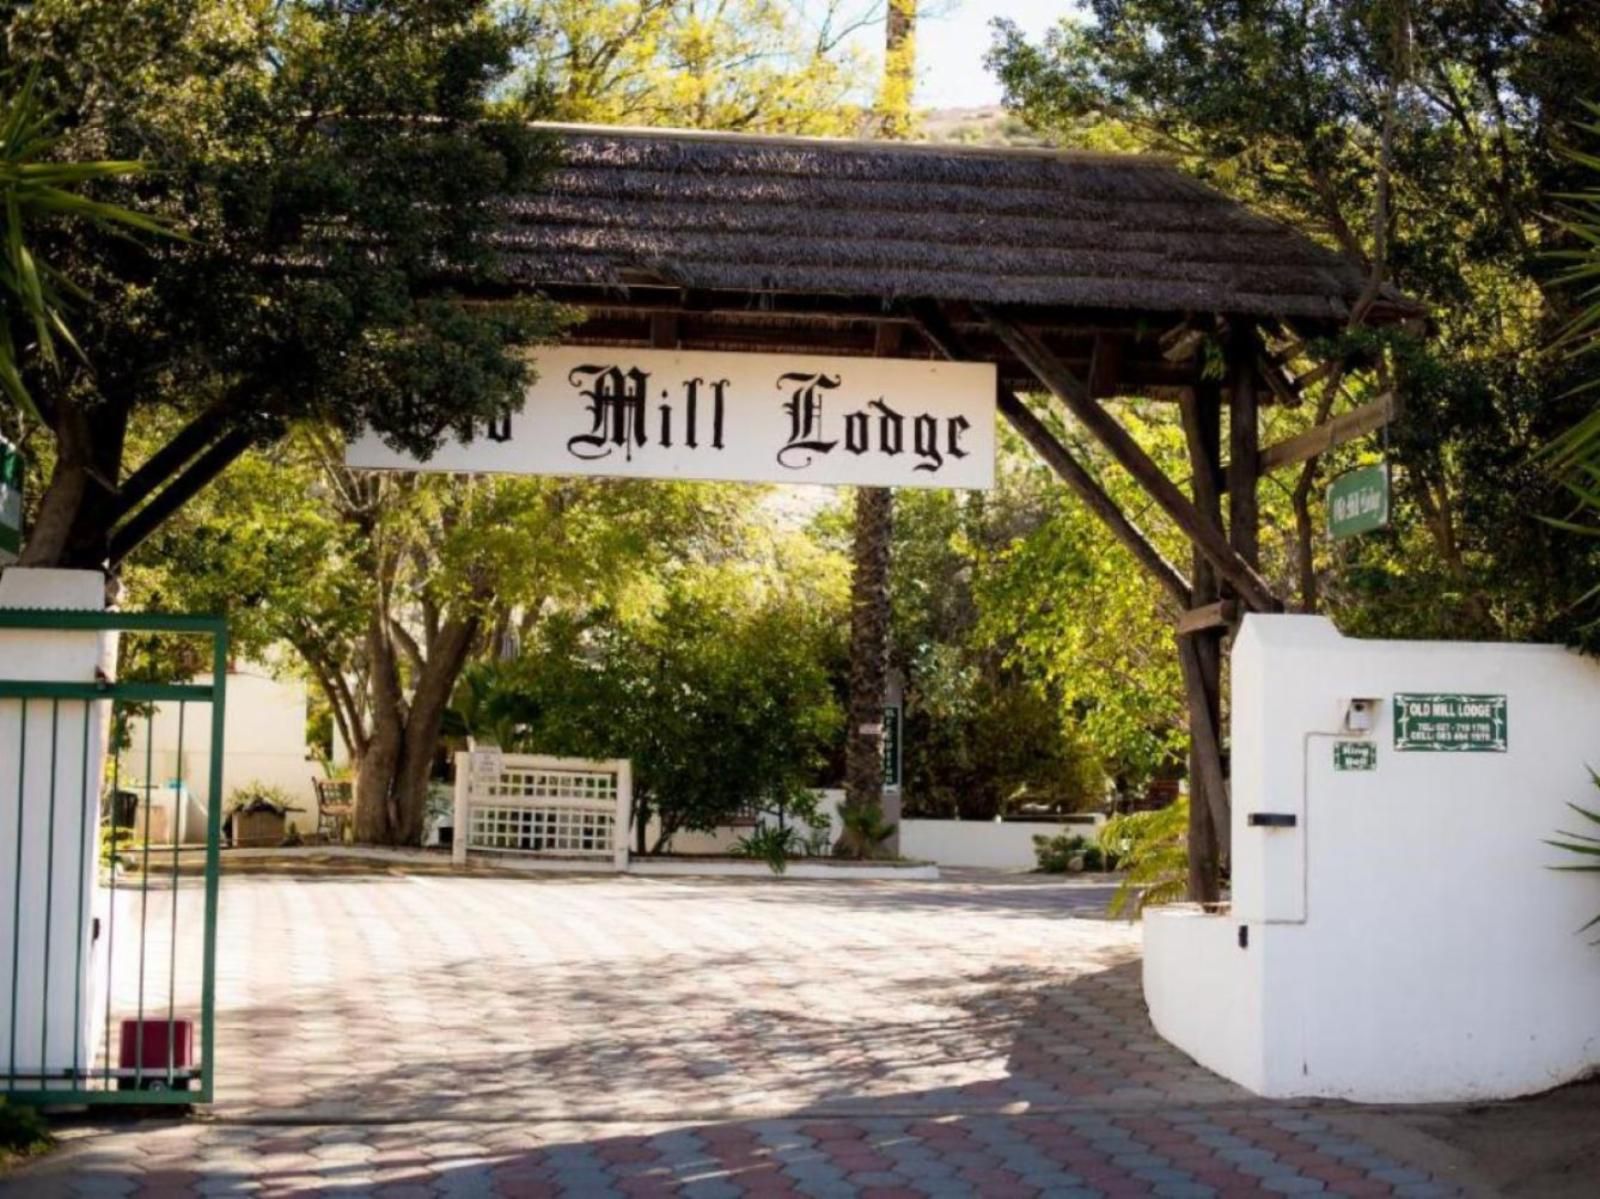 Old Mill Lodge Springbok Northern Cape South Africa Sign